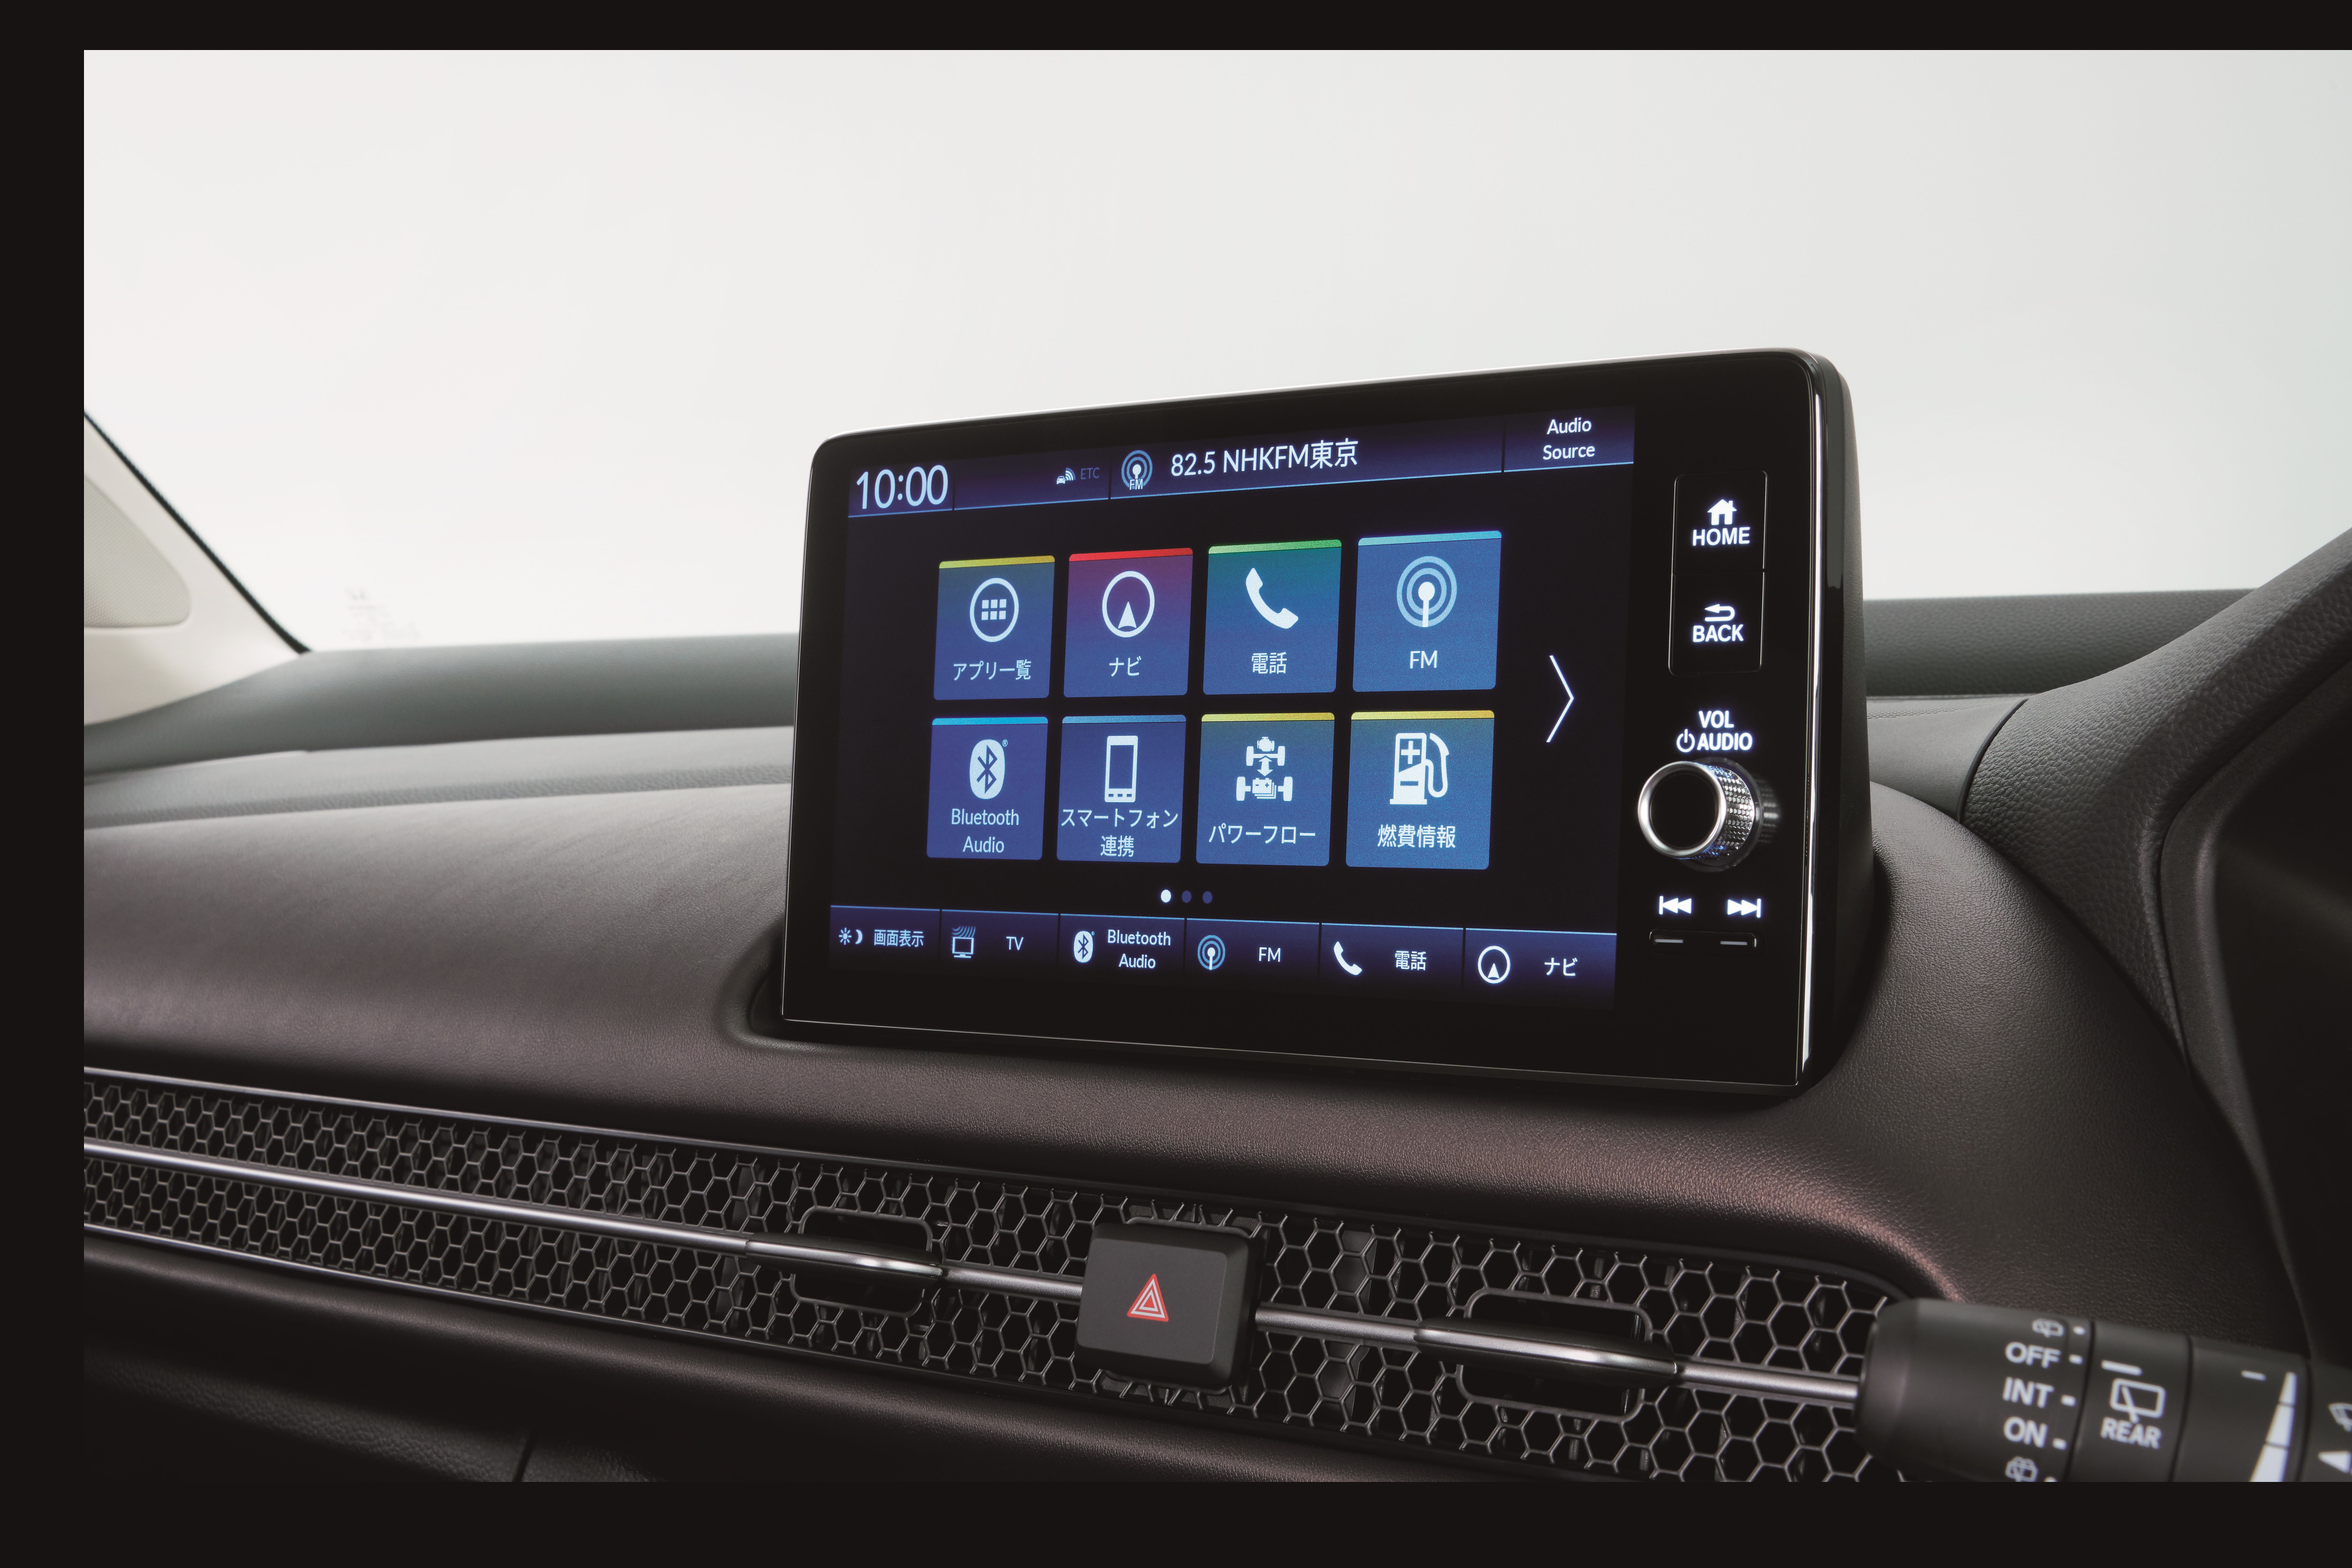 9-inch touch screen display with Apple CarPlay connectivity function